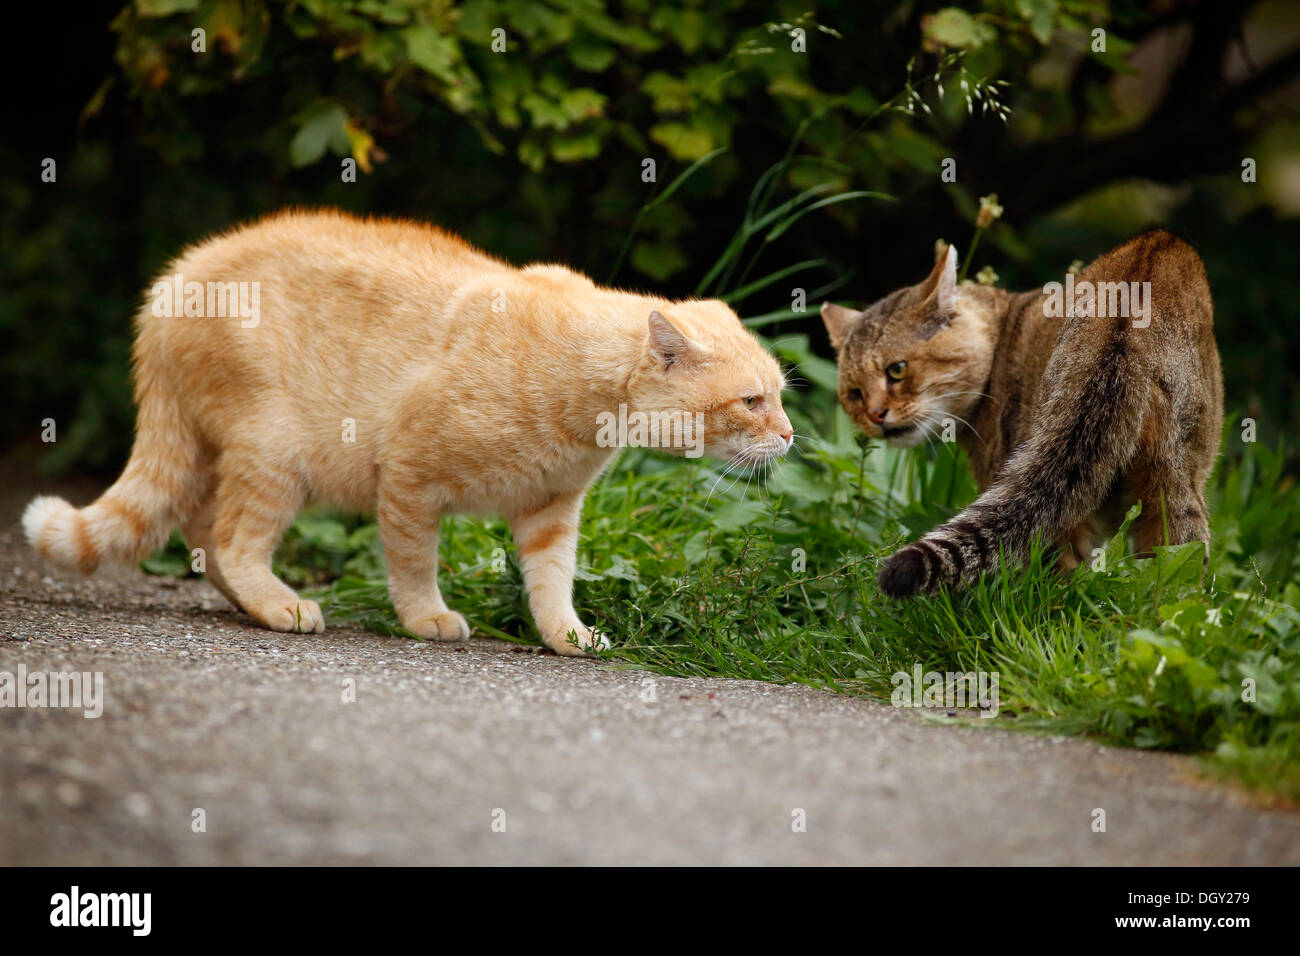 Behavior between rival males, light red tabby cat dominating a gray tabby cat Stock Photo